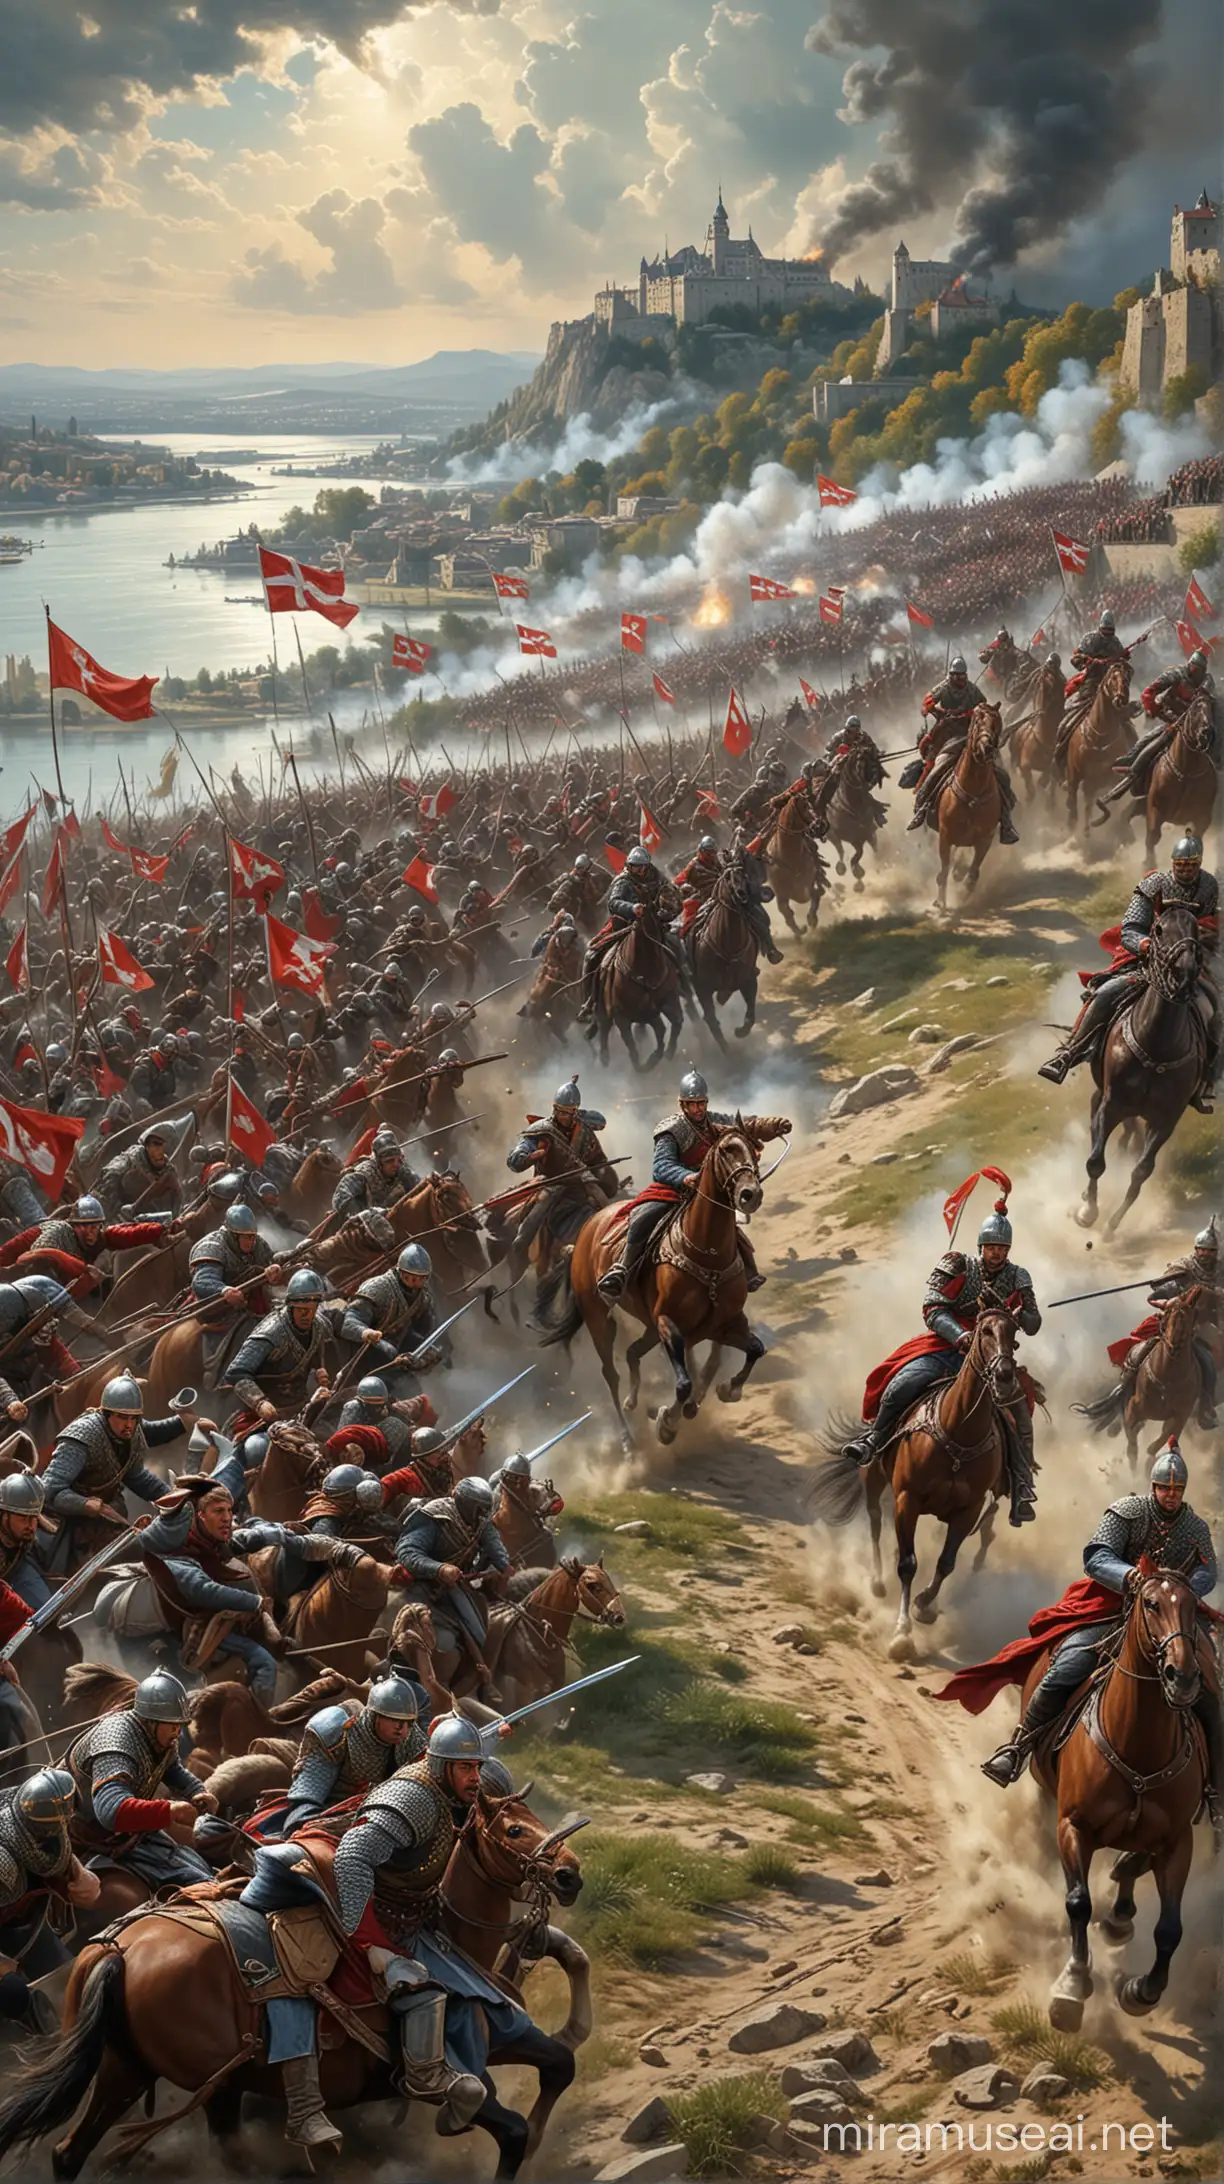 Produce a striking image of King Sobieski's famous charge, capturing the chaos and heroism of the moment as Polish Hussars thunder down the Kahlenberg Hill, their winged lances glinting in the sunlight, while Ottoman soldiers scramble to defend against the unexpected assault, their expressions a mix of shock and fear, with the Vienna skyline and the glittering waters of the Danube River stretching out below. Hyper realistic